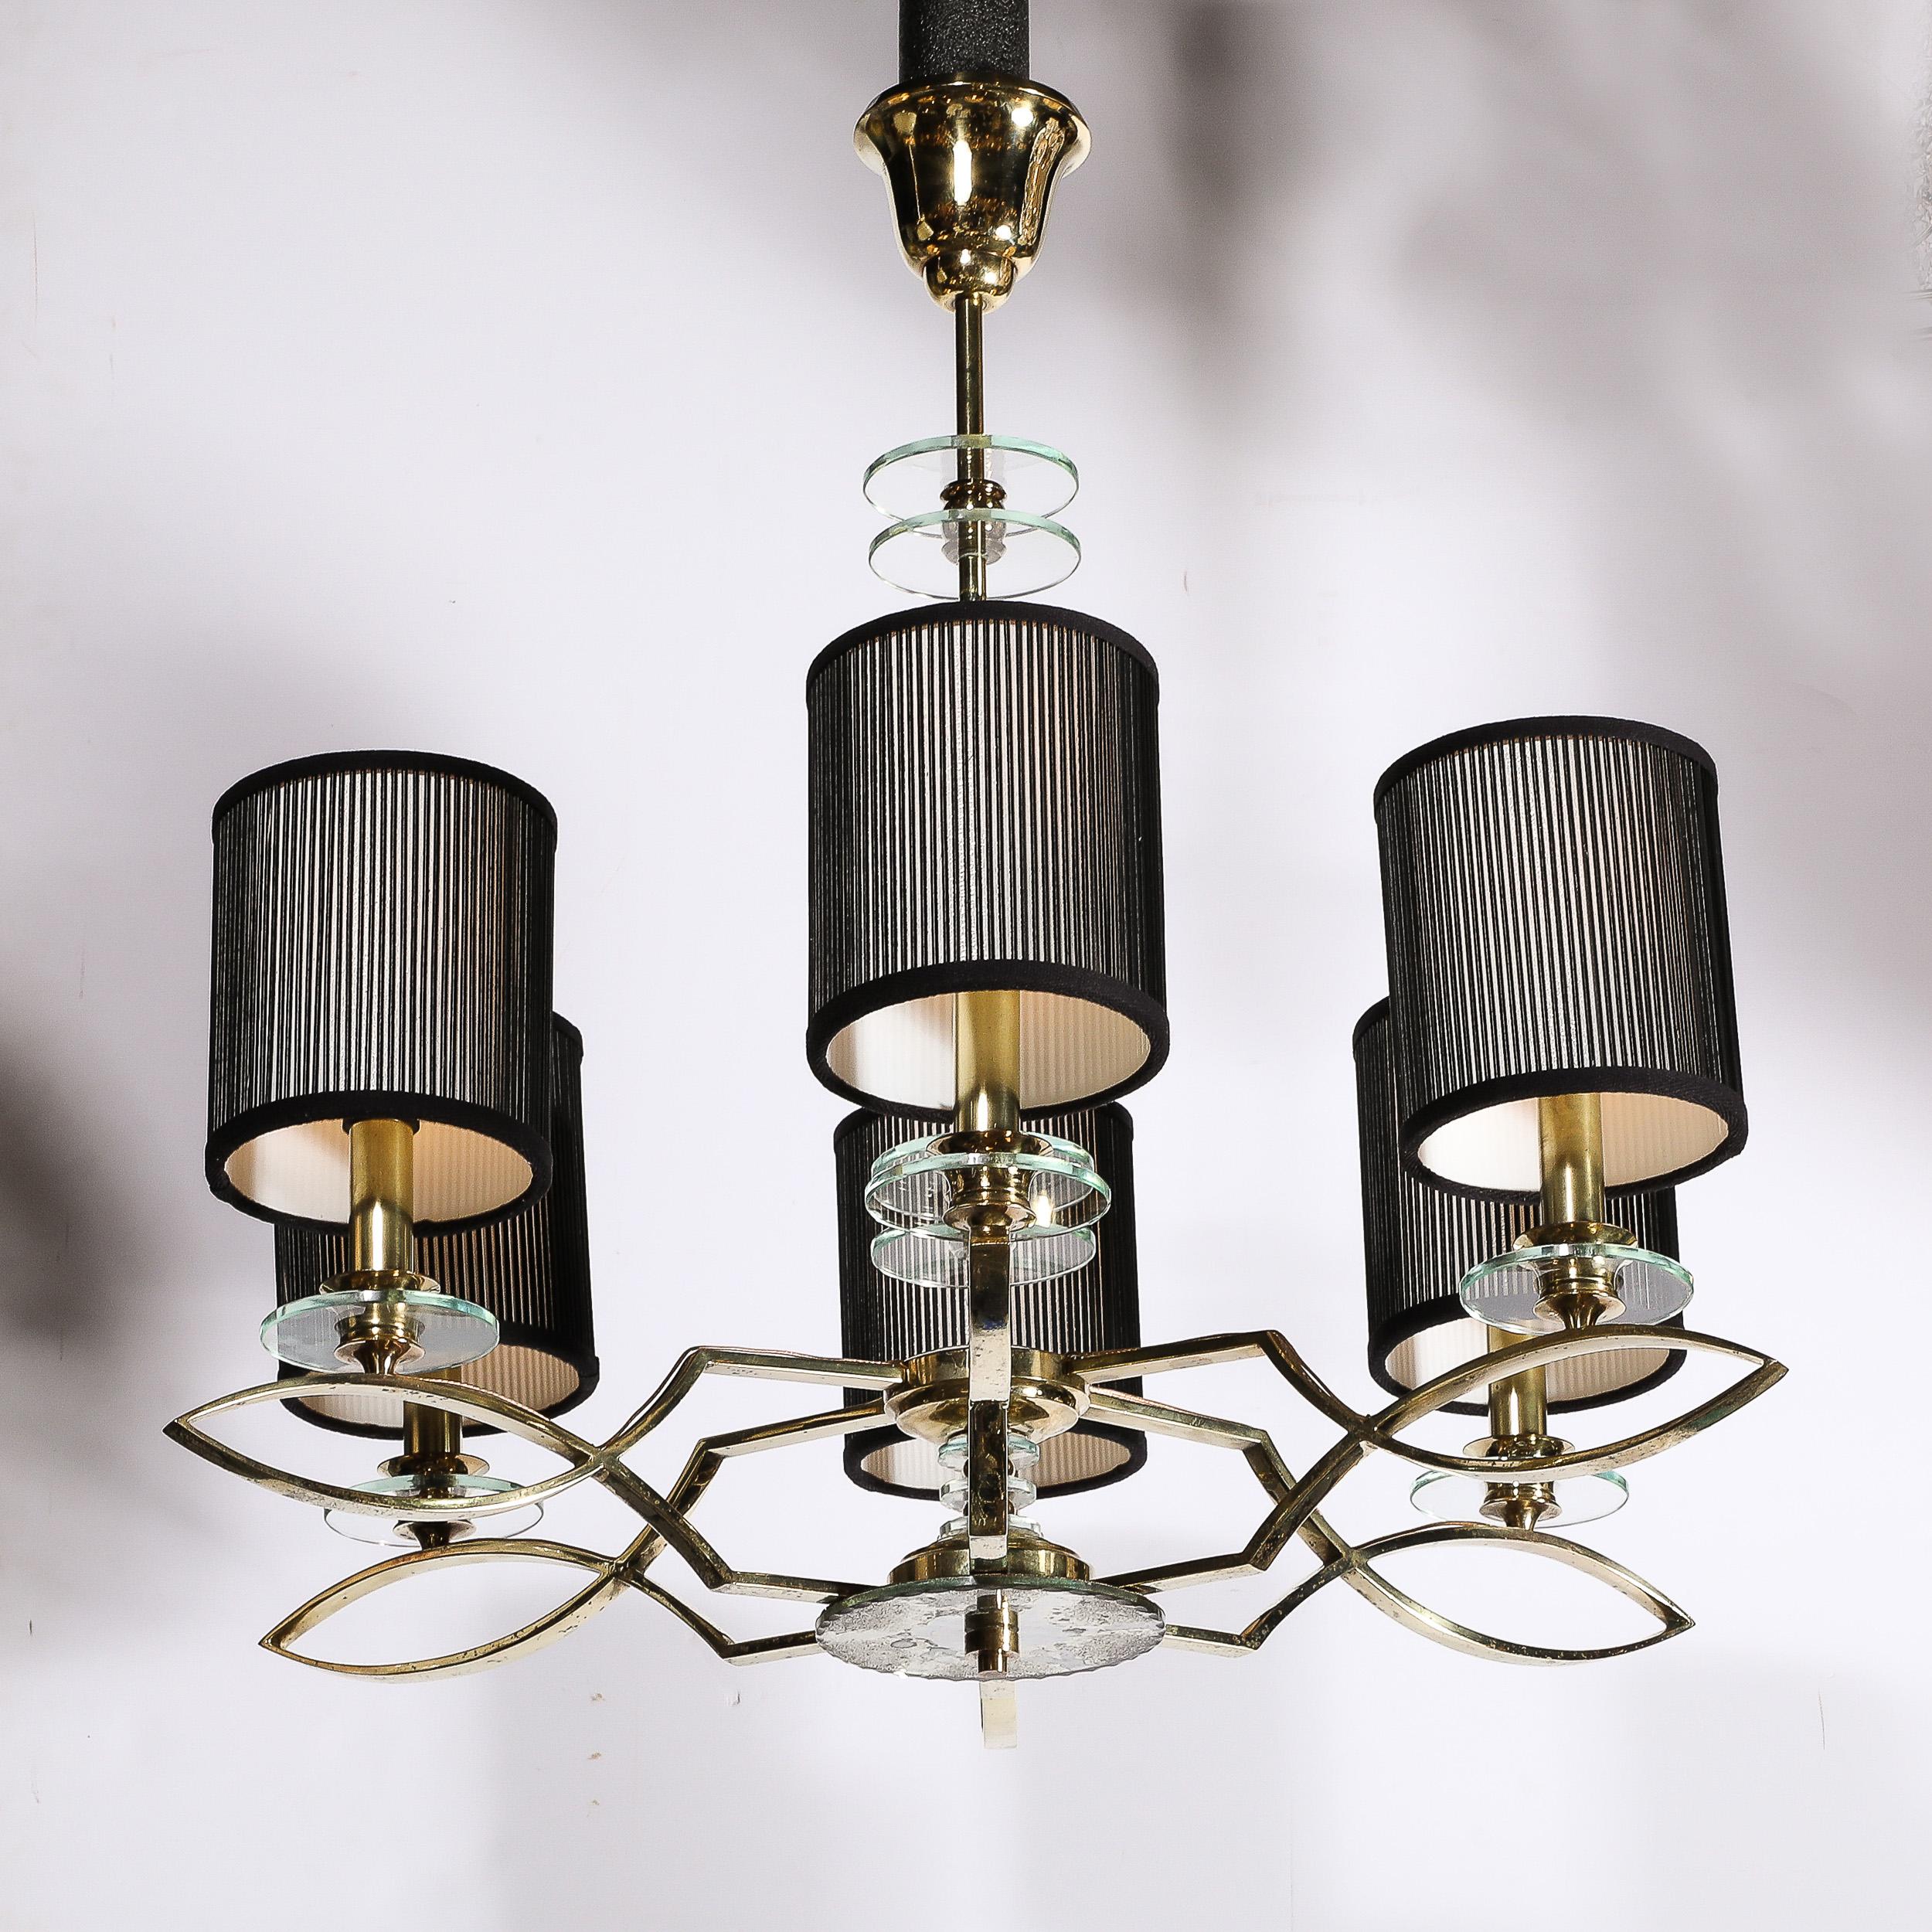 French Mid-Century Modernist Six Arm Chandelier in Brass, Glass & Antiqued Mirror For Sale